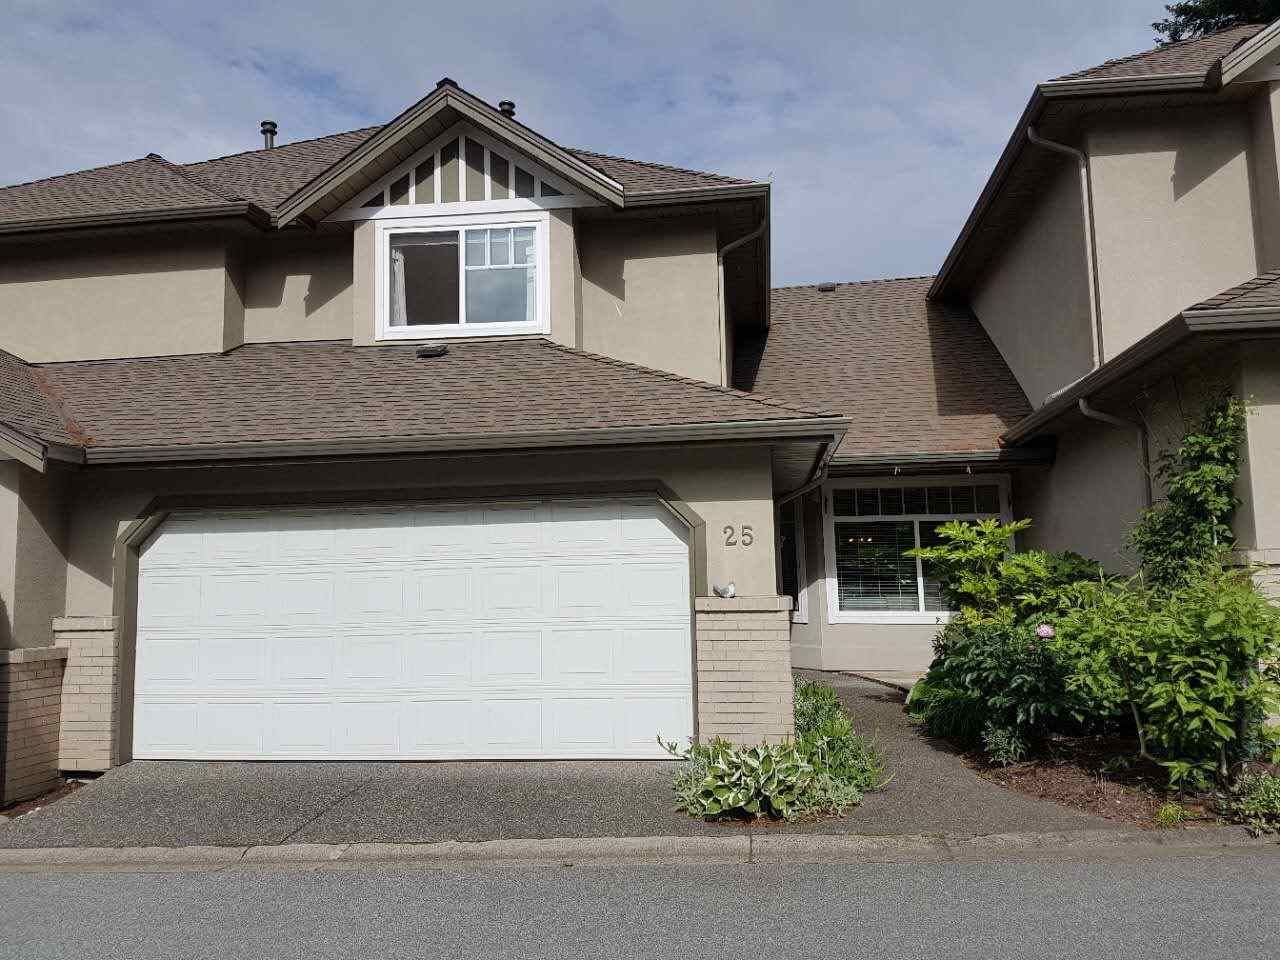 Main Photo: 25 15151 26 AVENUE in : Sunnyside Park Surrey Townhouse for sale : MLS®# R2172703